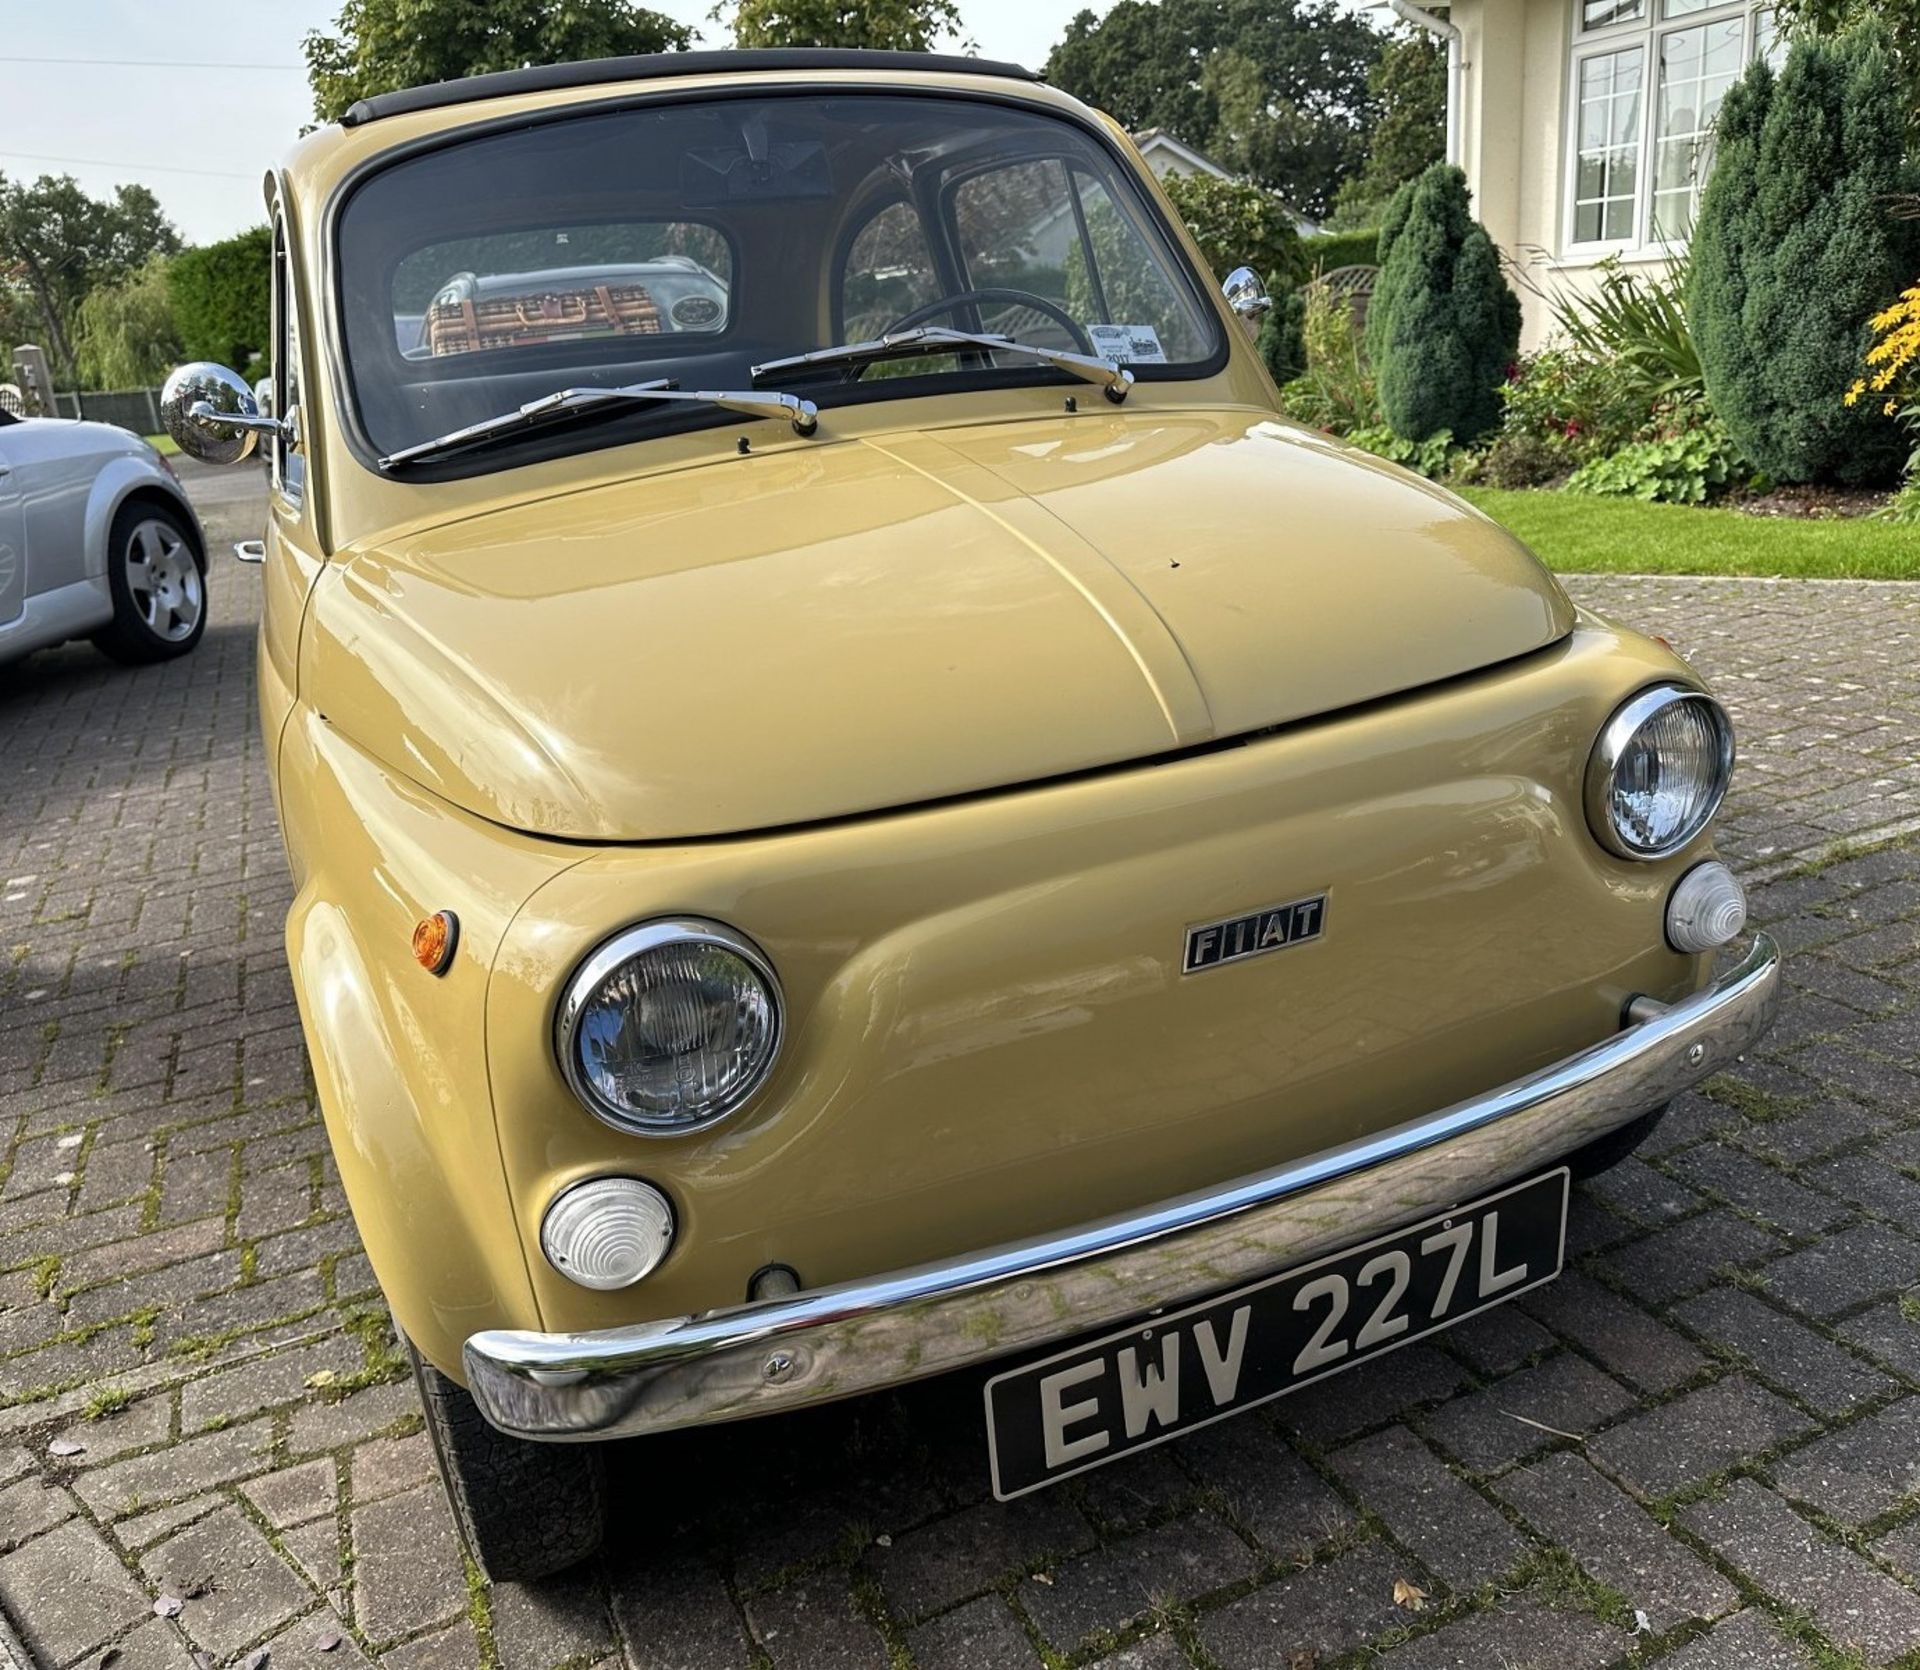 ***Being sold without reserve*** 1973 Fiat 500F Registration number EWV 227LChassis number - Image 4 of 51